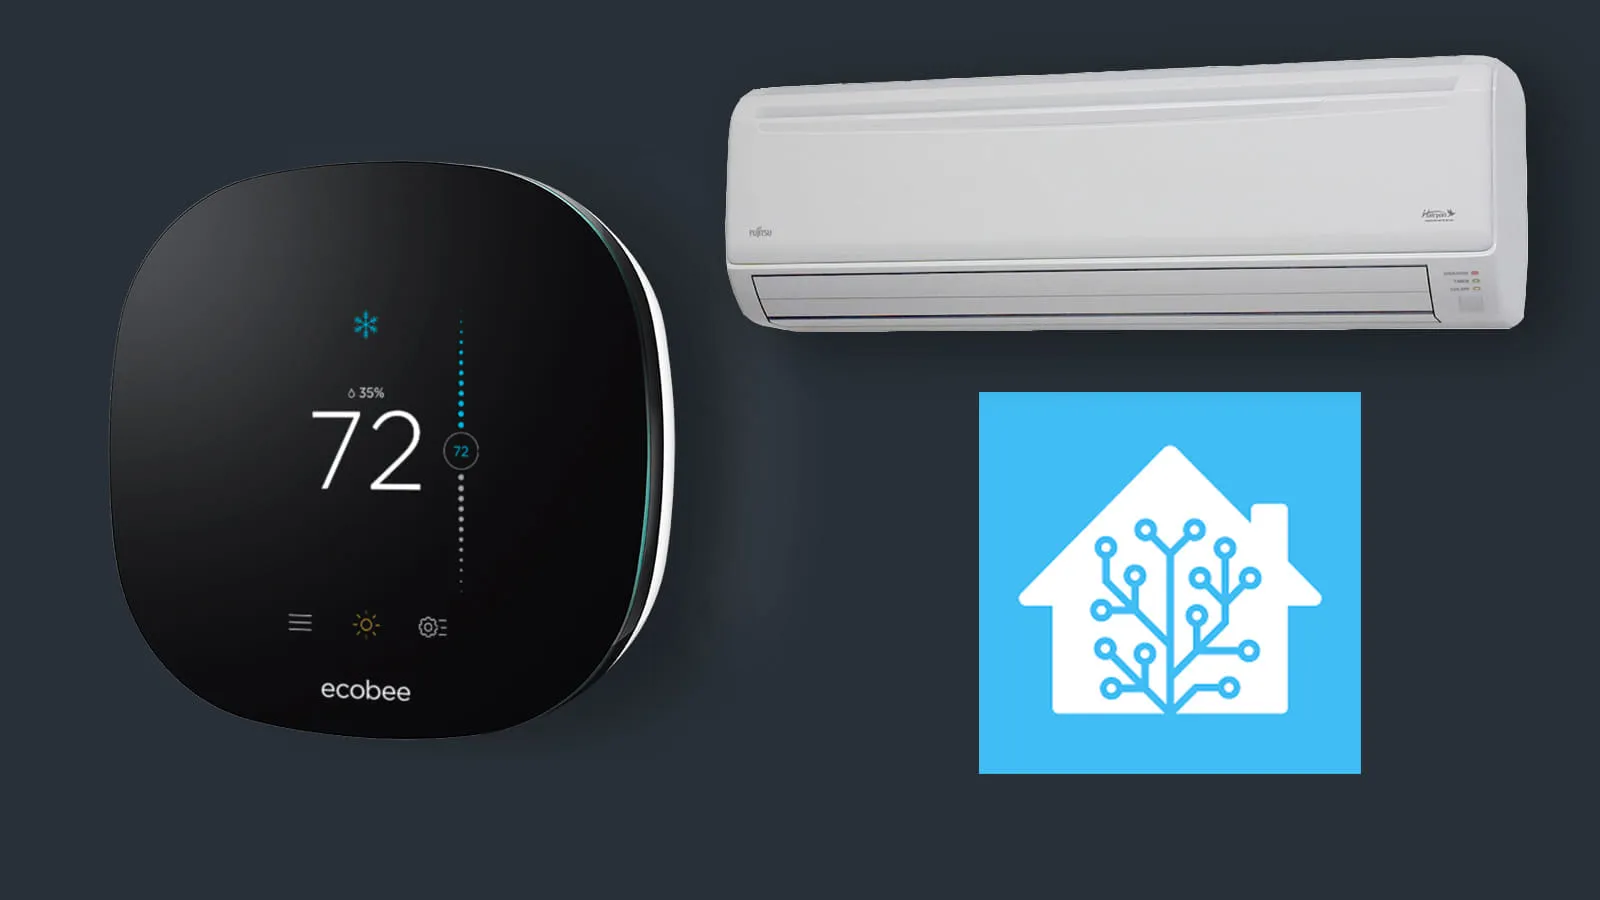 Tricking an Ecobee Thermostat to Wirelessly Control Mini Split Unit Without Any Wiring